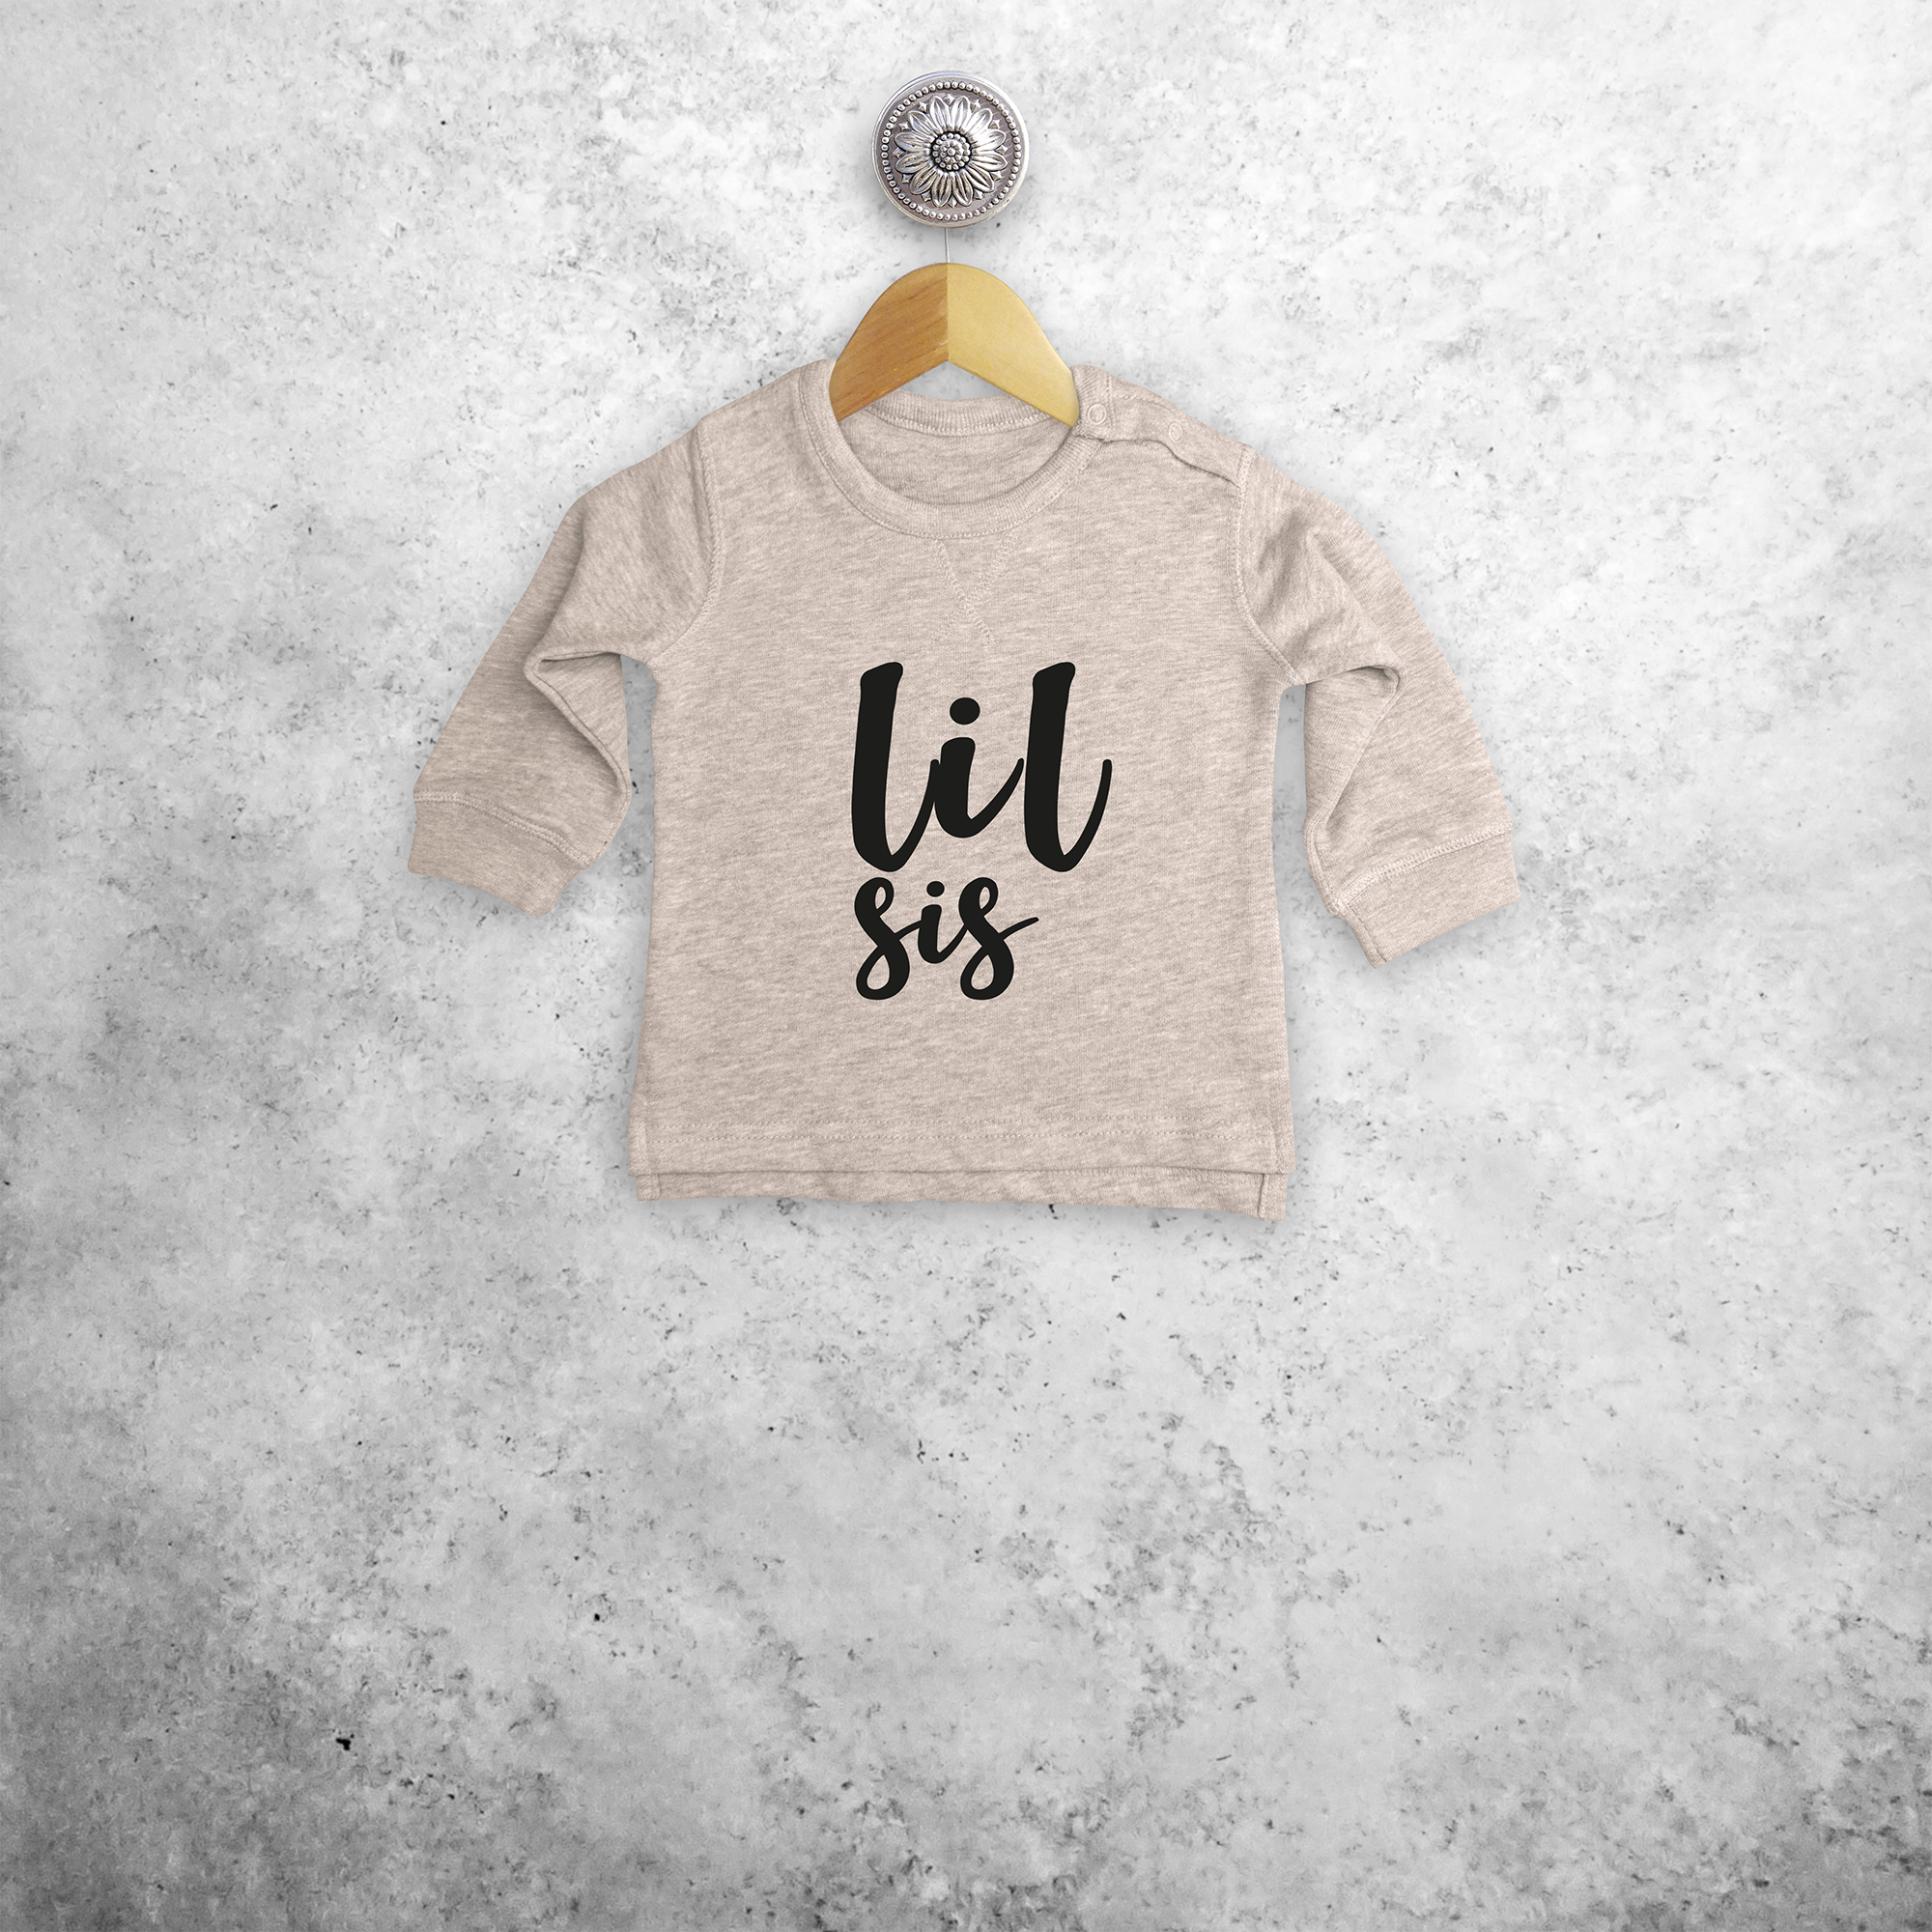 'Lil sis' baby sweater